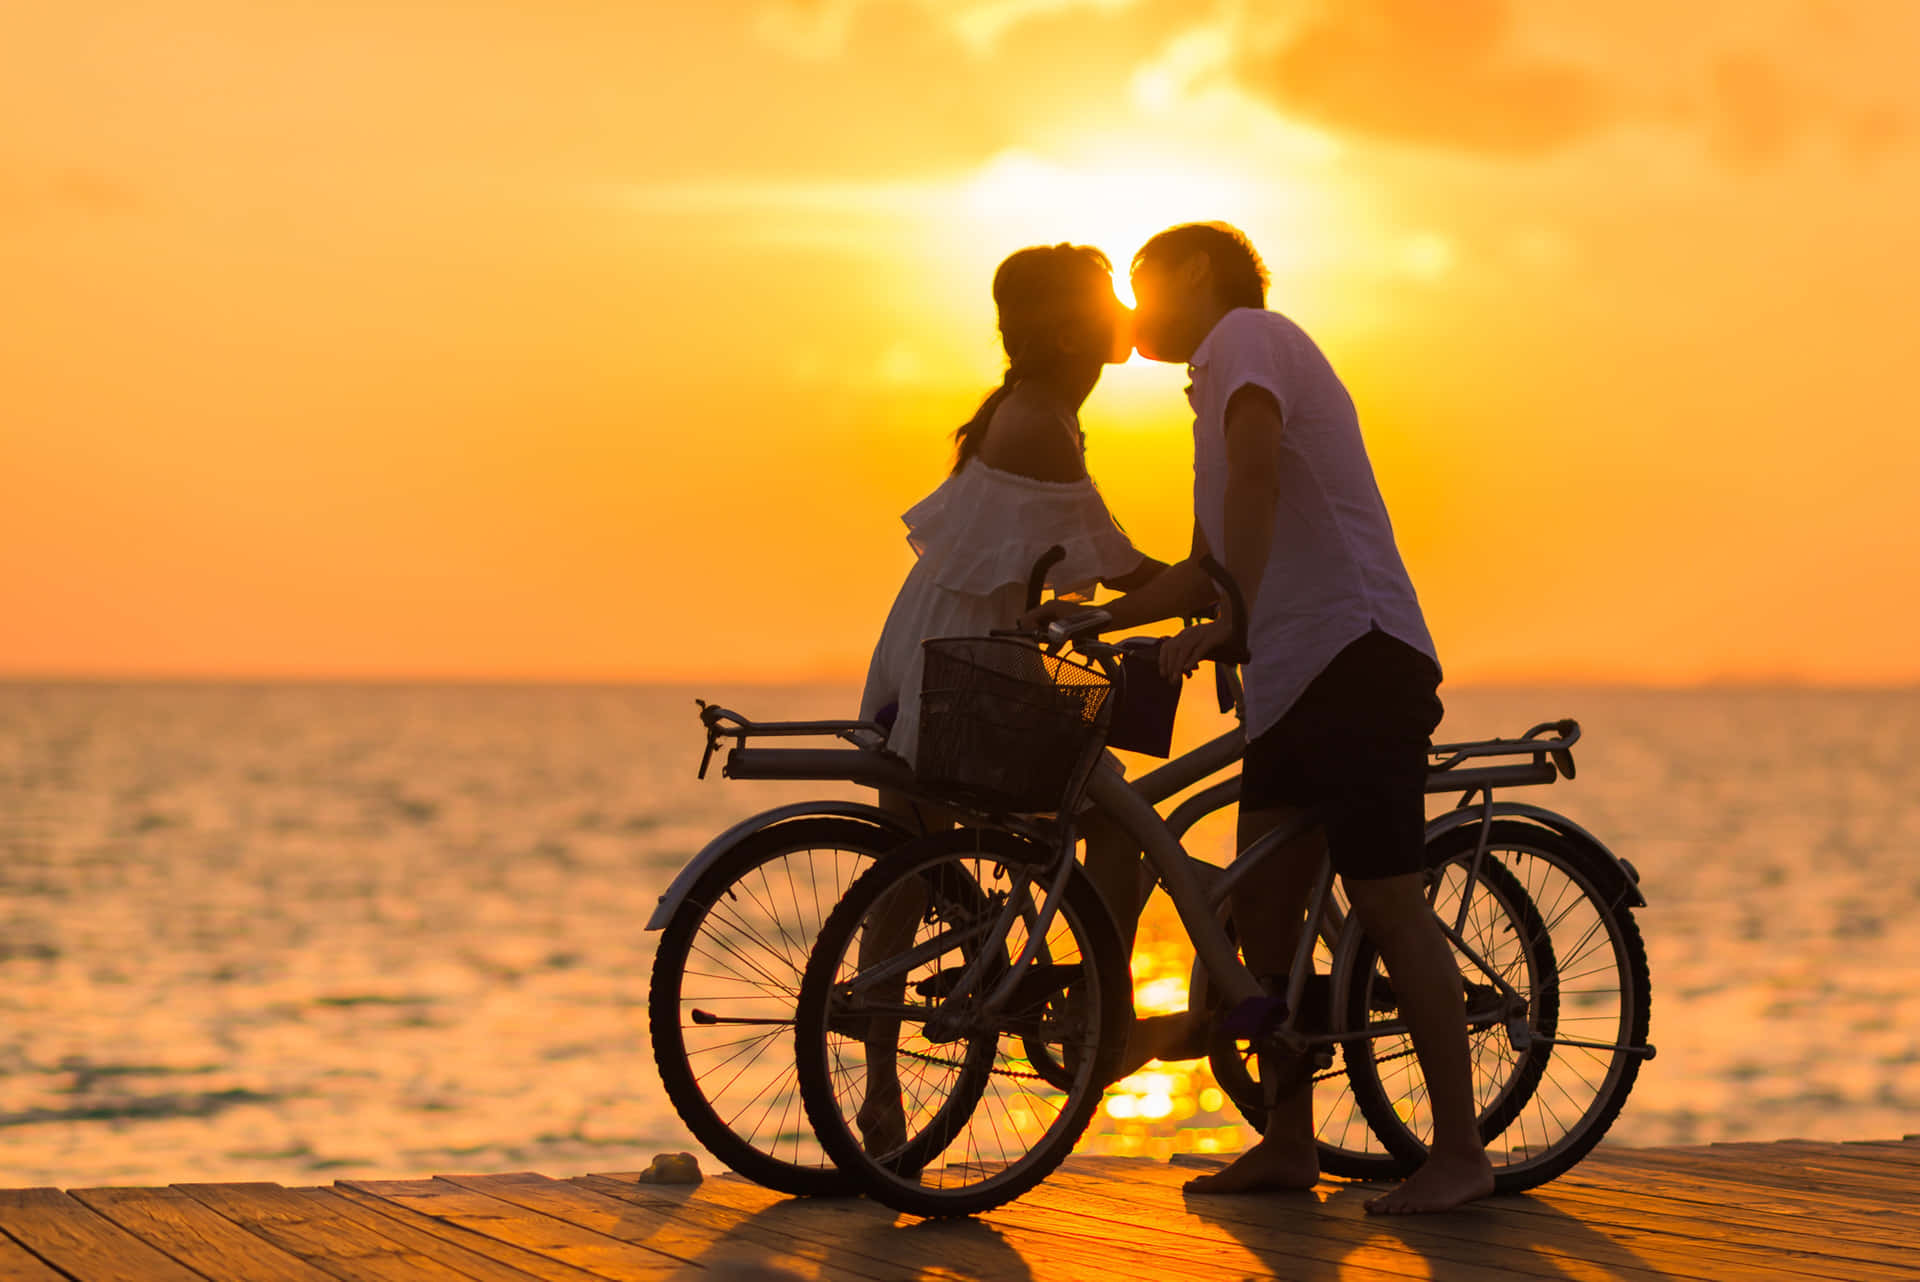 Couple Goal Photos, Download The BEST Free Couple Goal Stock Photos & HD  Images